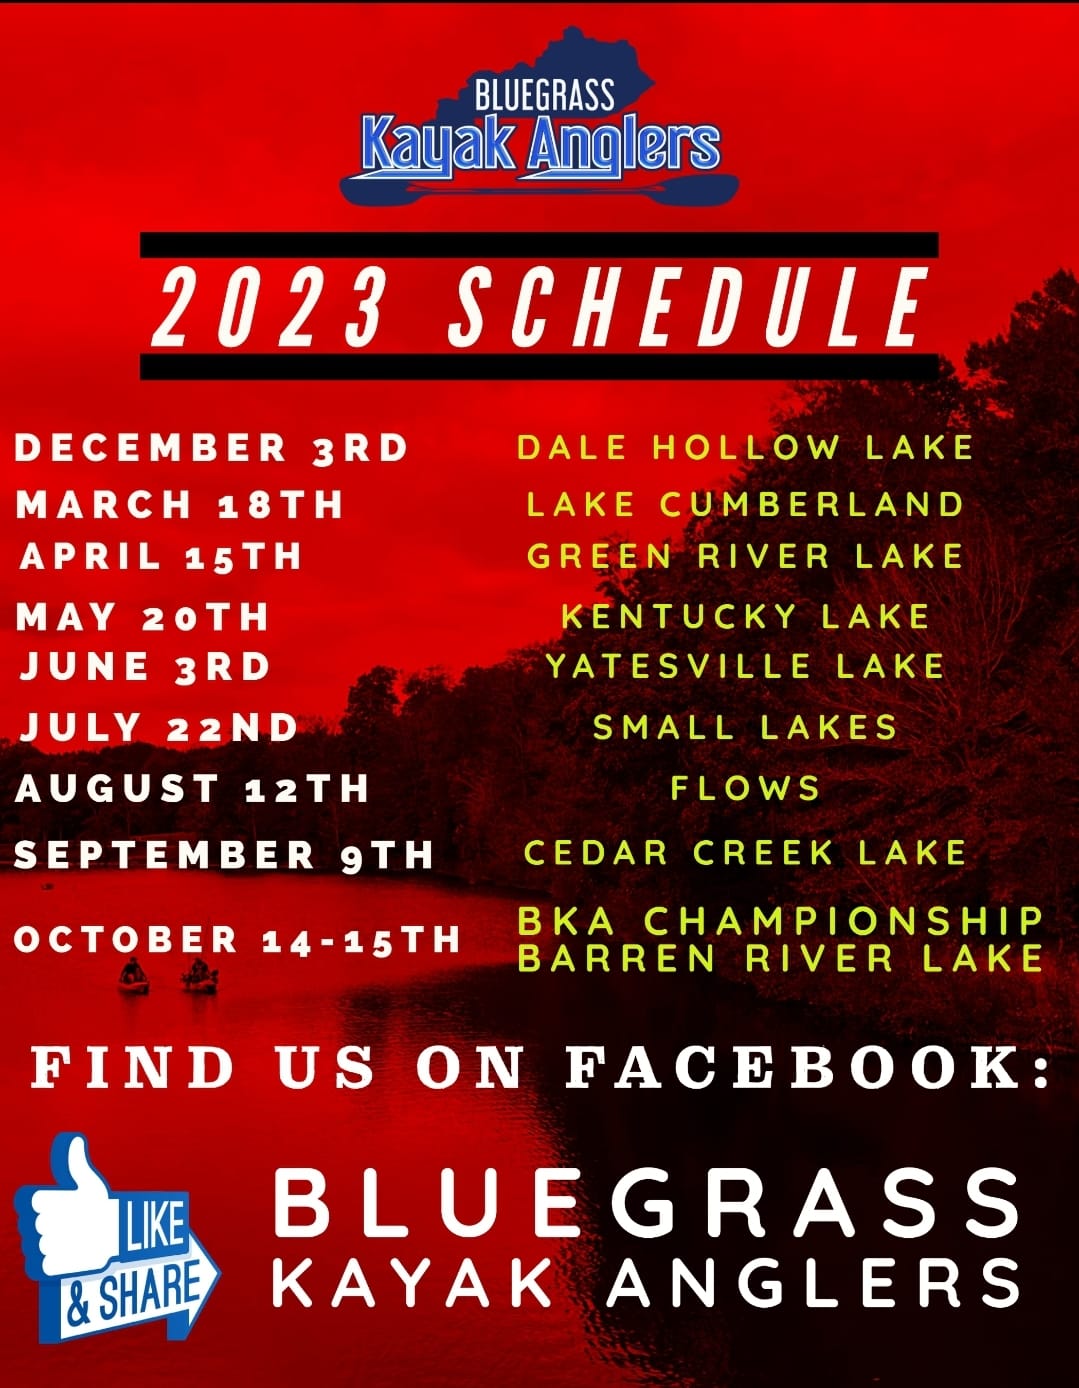 2023 schedule for the Bluegrass Kayak Anglers